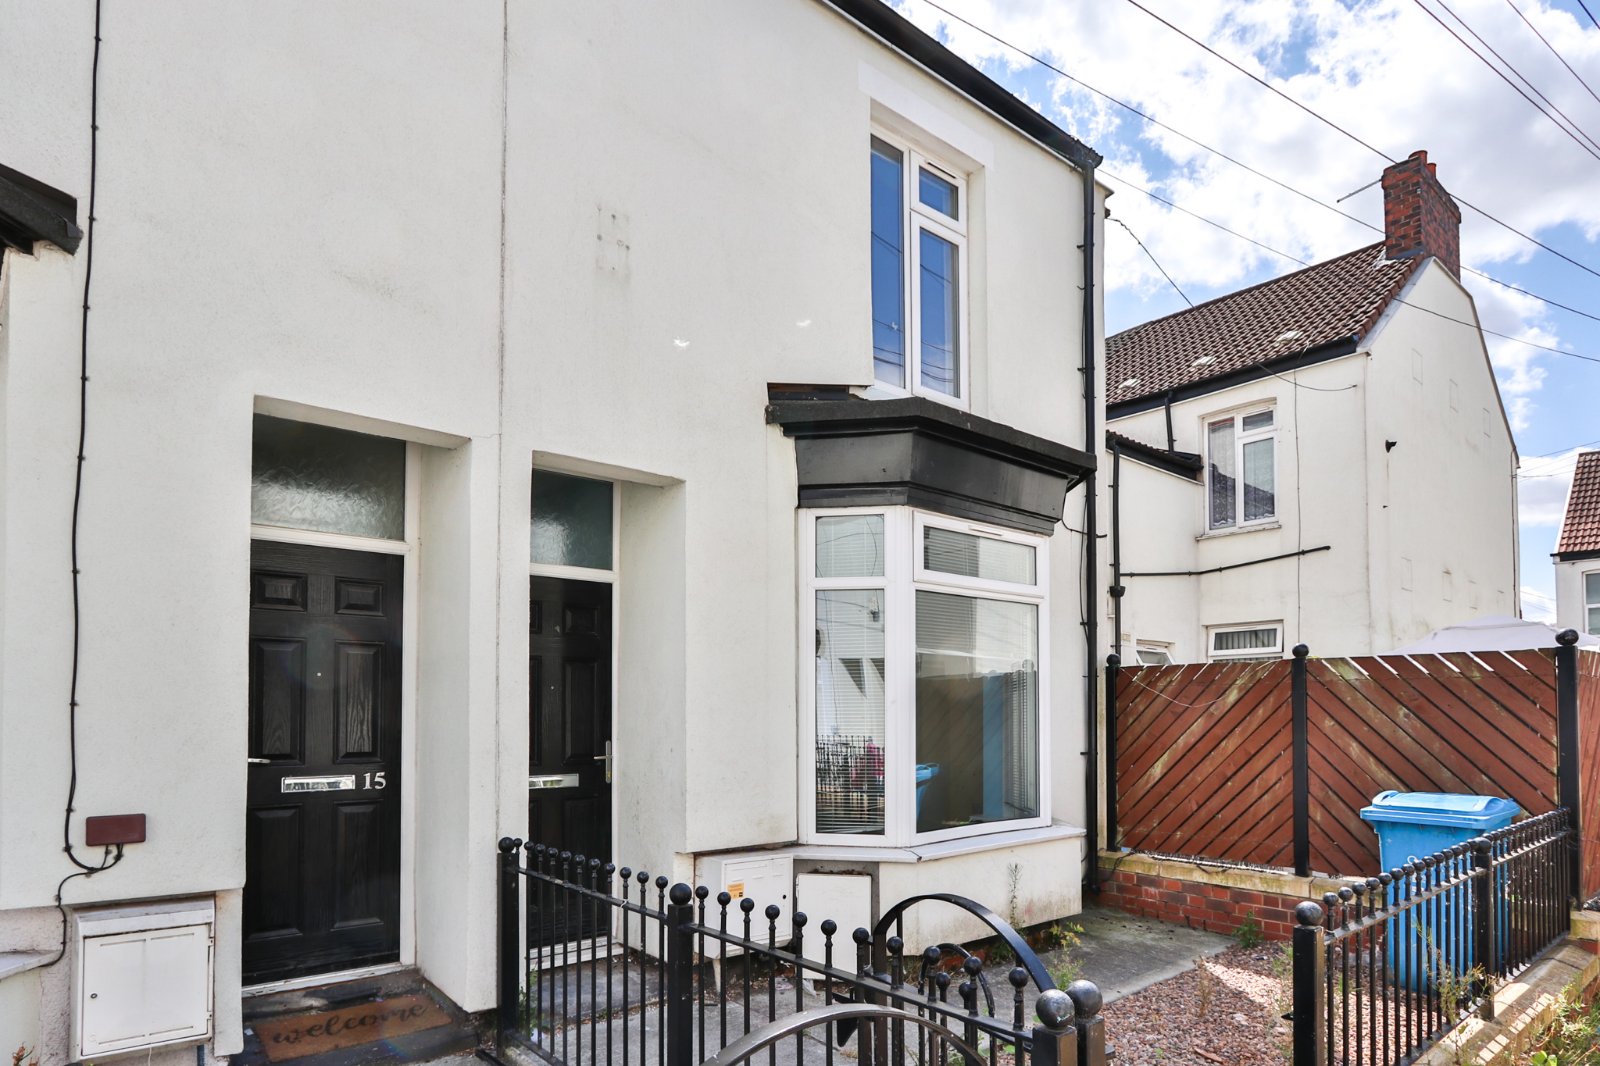 3 bed house for sale in Albert Avenue, Wellsted Street, HU3 